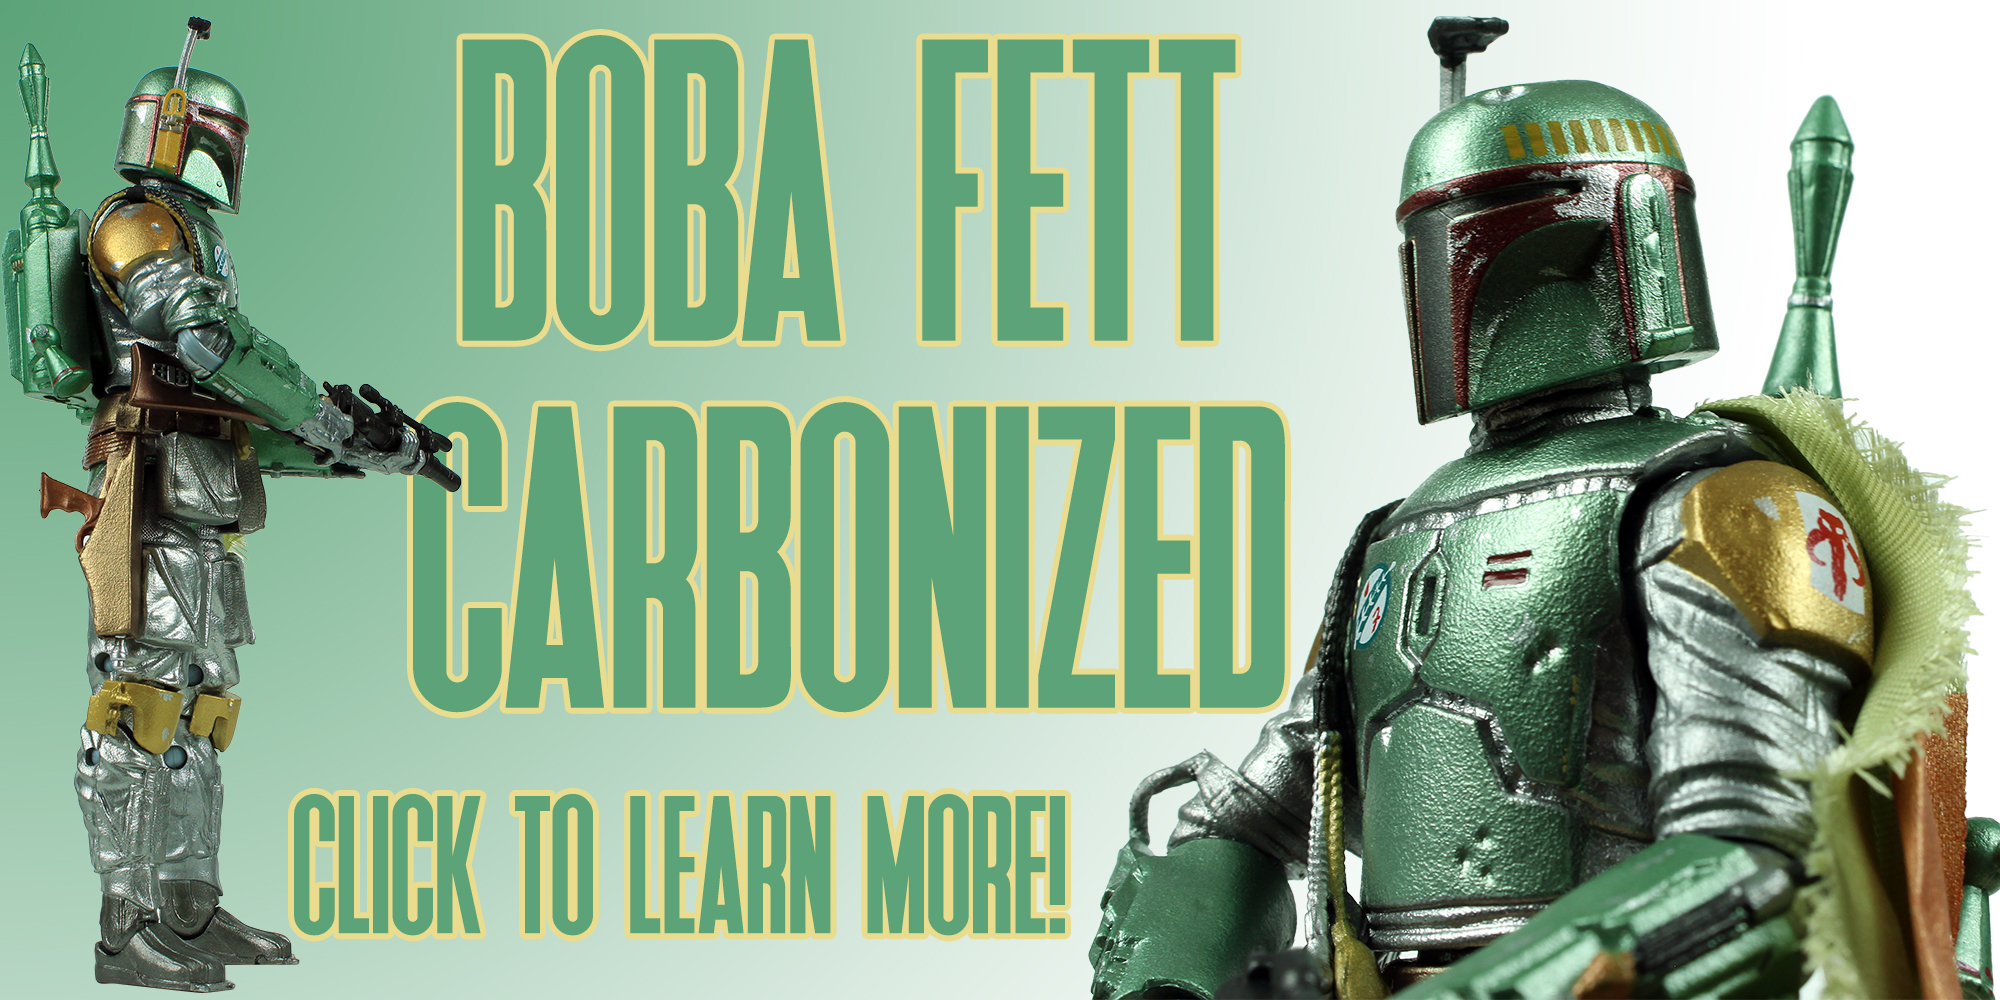 The Black Series Carbonized Boba Fett Figure Is Now Archived